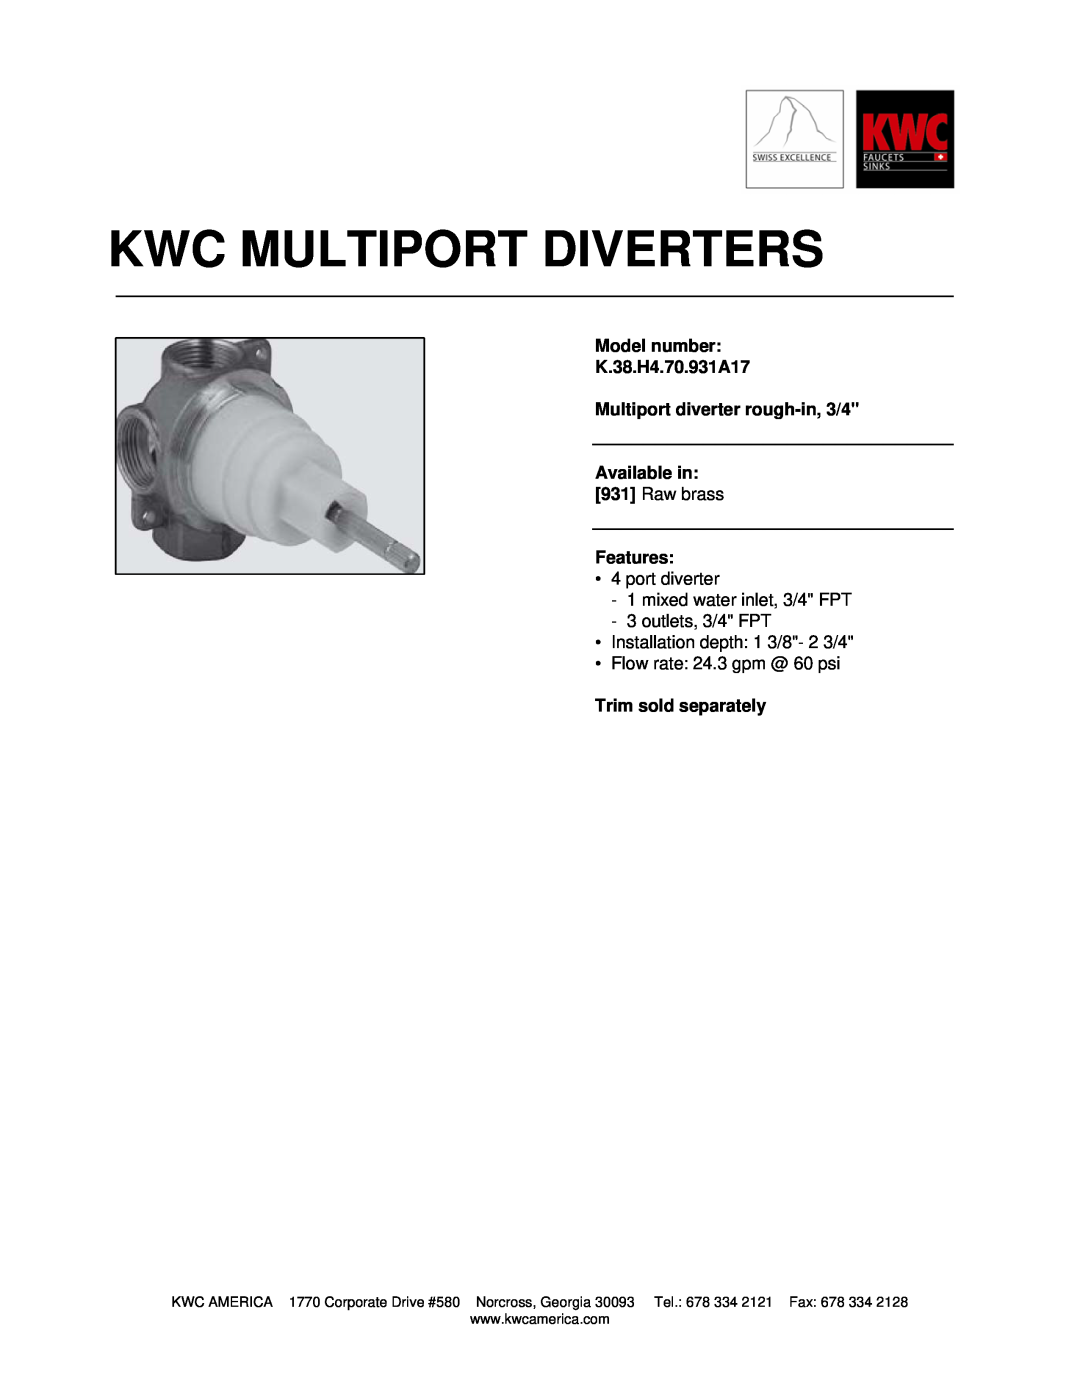 KWC manual Kwc Multiport Diverters, Model number K.38.H4.70.931A17, Multiport diverter rough-in,3/4 Available in 